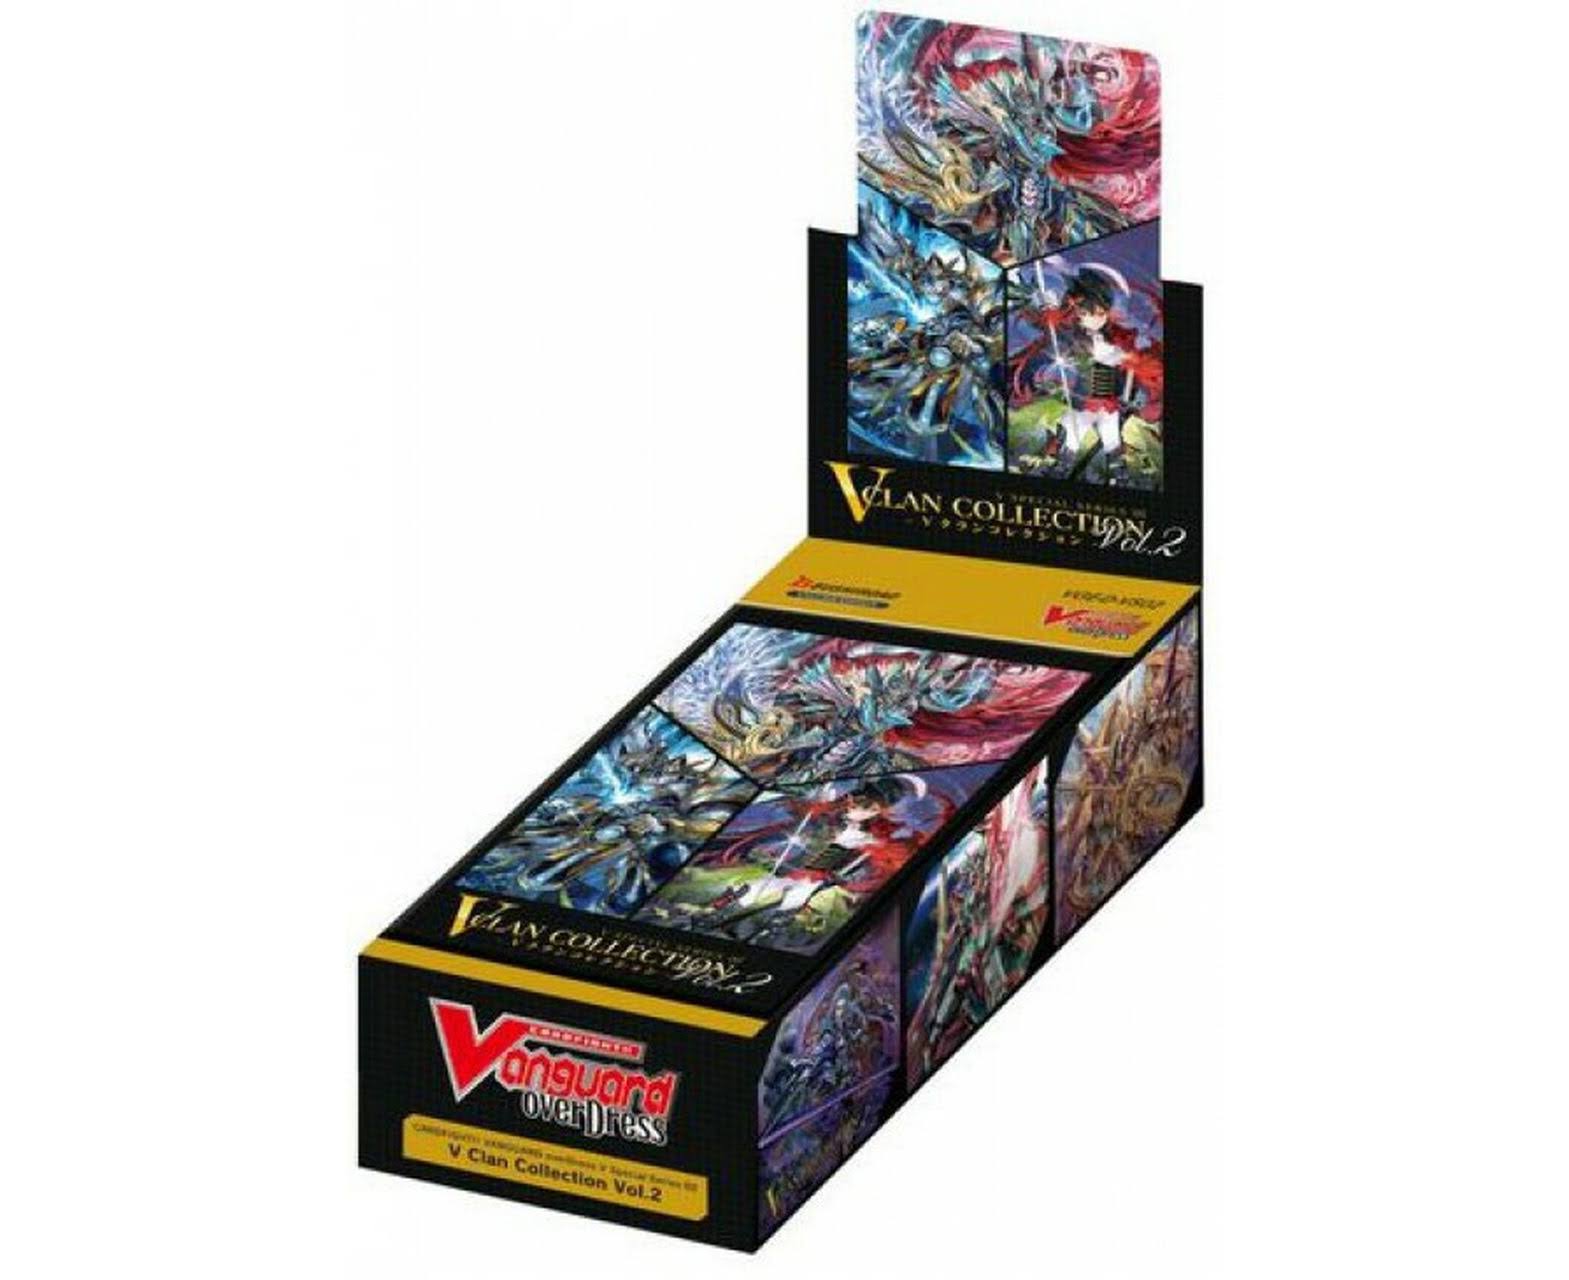 Cardfight Vanguard TCG: V Clan Collection Vol.2 Booster Box (16 Packs)